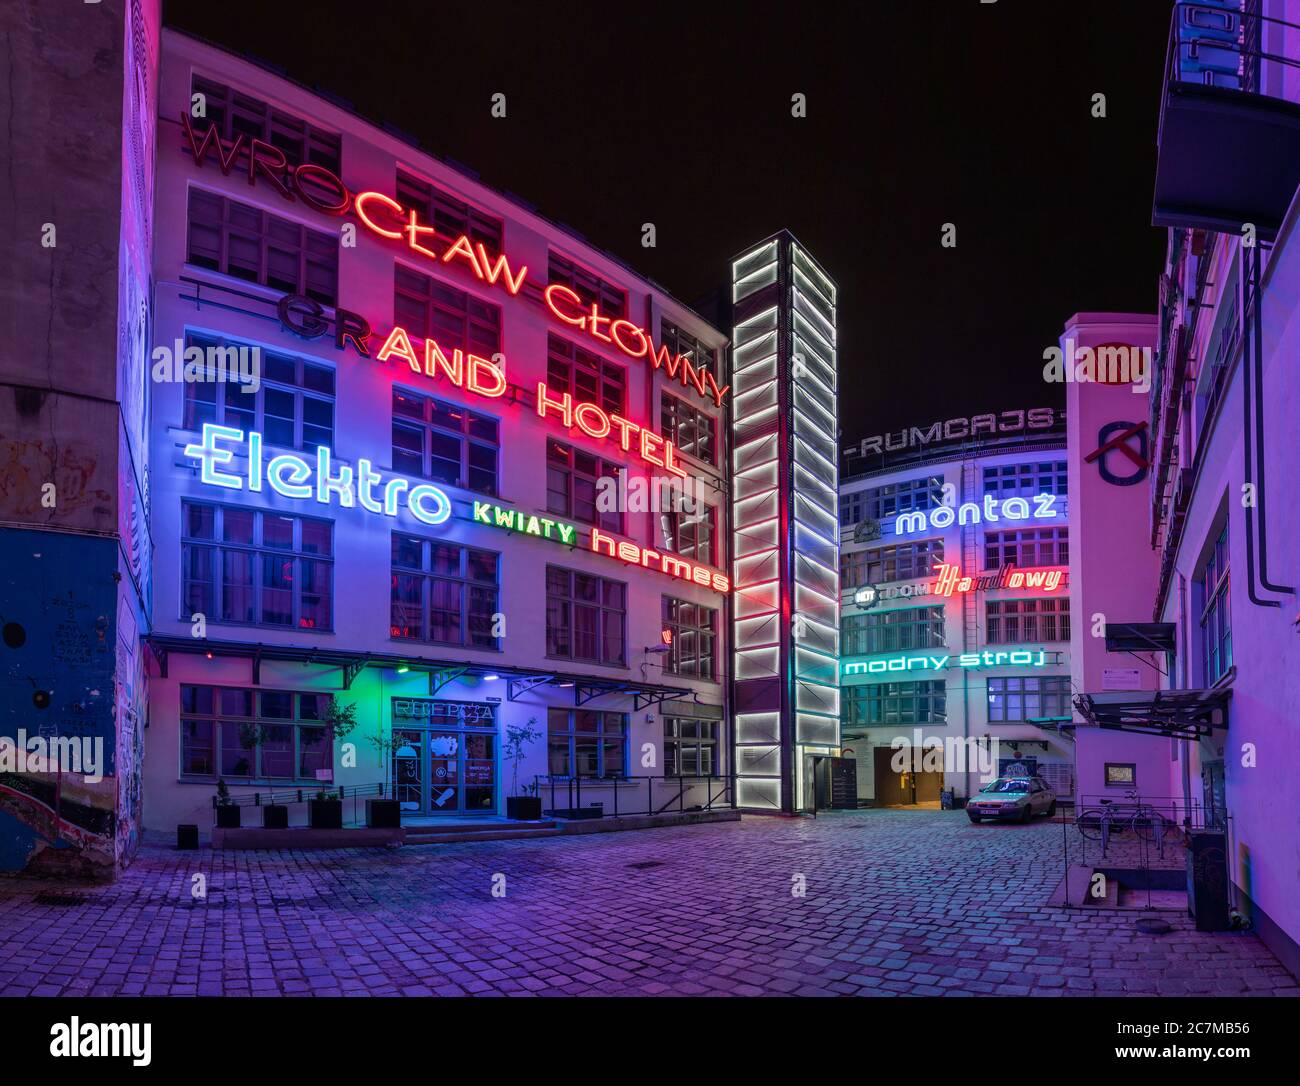 Wroclaw, Poland - June 09 2020: Neonside - A collection of historical neon advertising signs that enthusiasts have collected since 2005 Stock Photo